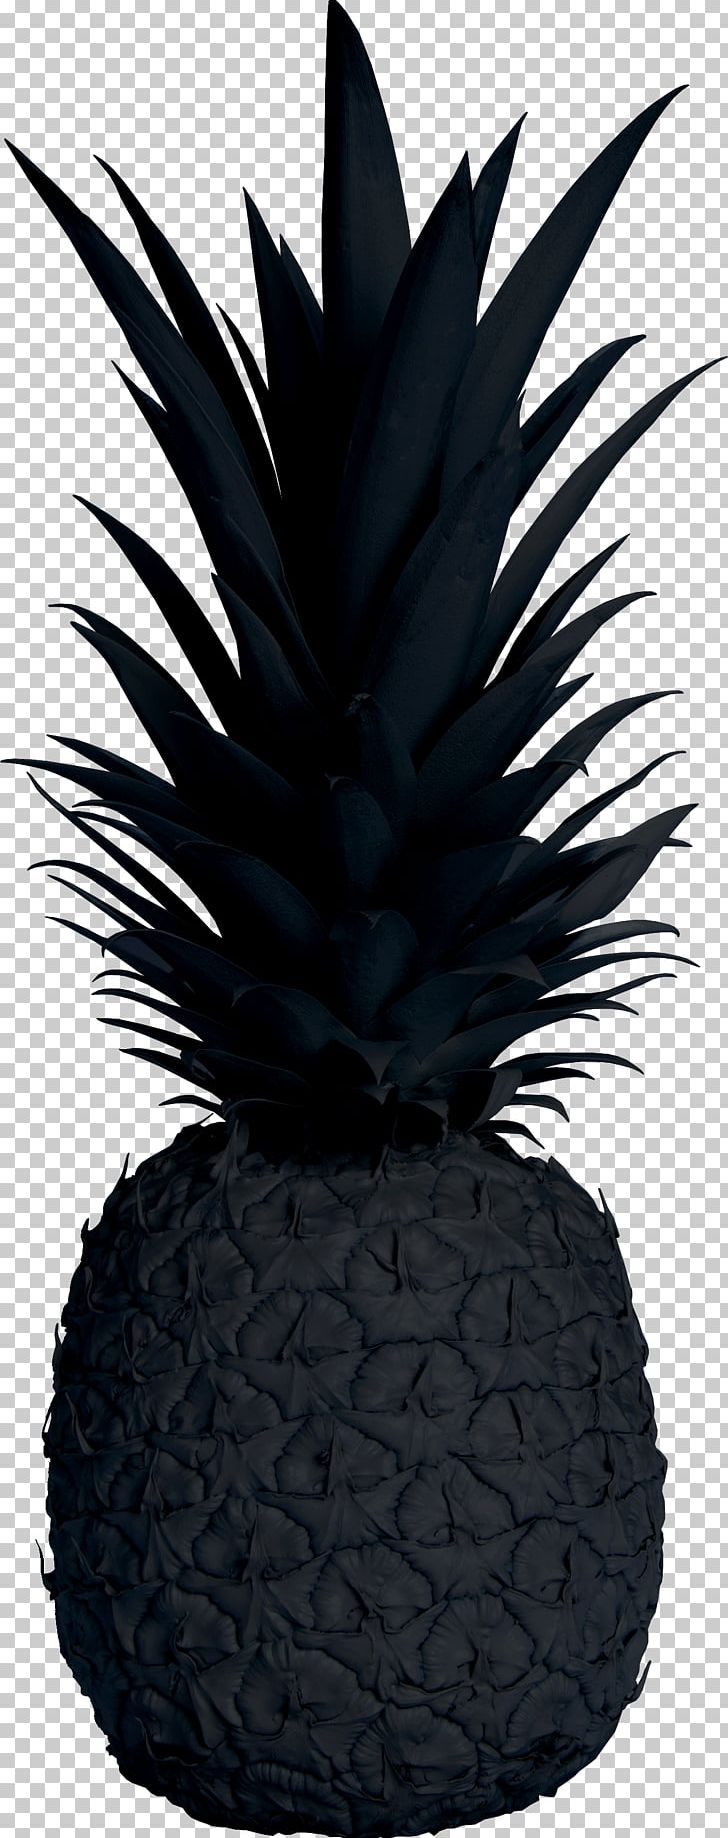 Pineapple Public Relations Black Pineapple Co Grey PNG, Clipart, Ananas, Black, Business, Chamblee, Flowerpot Free PNG Download